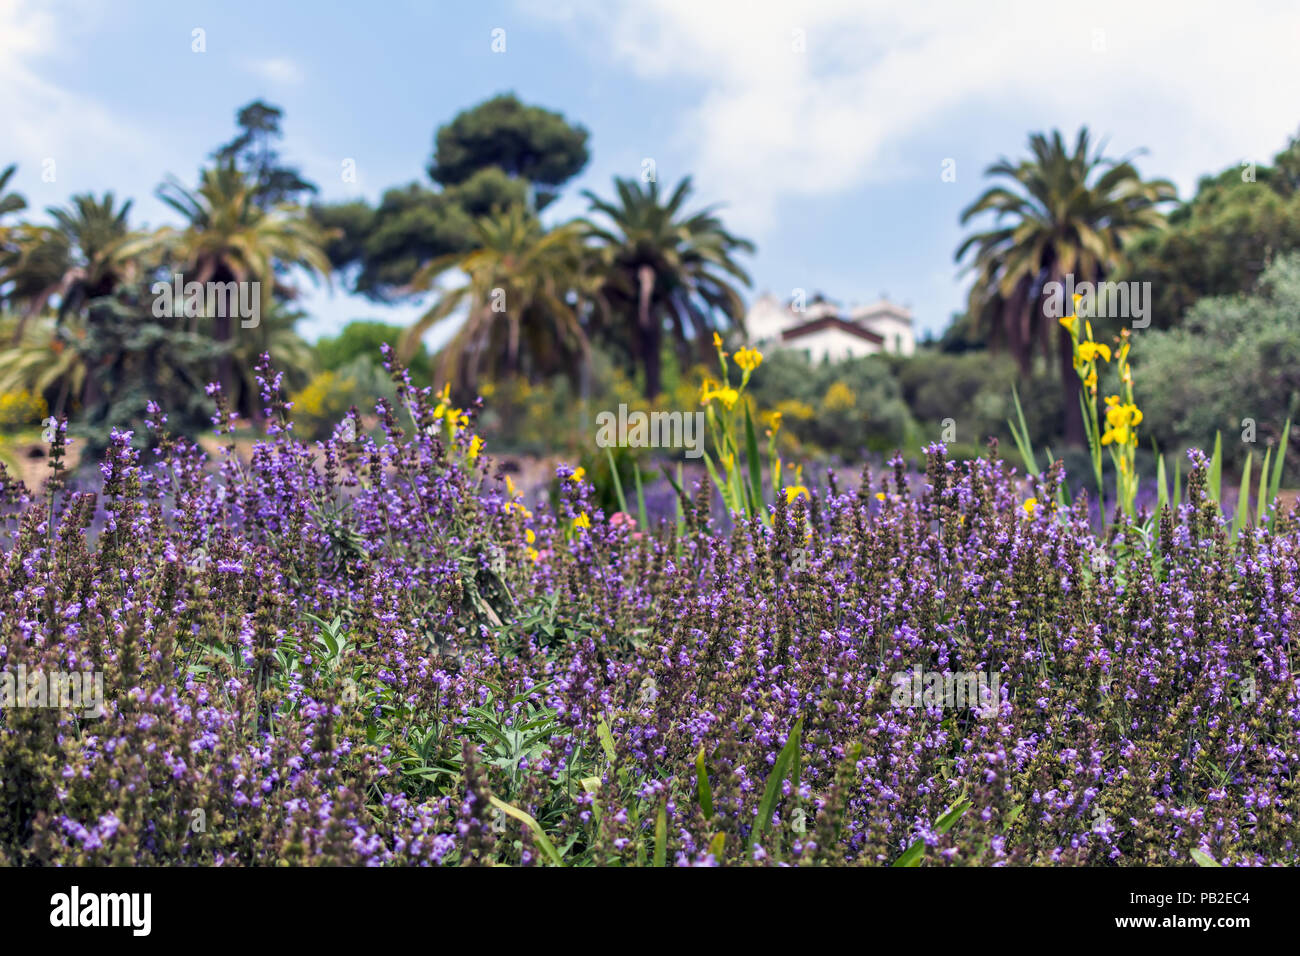 Lush purple sage flowers (Salvia officinalis) with Casa Marti Trias i Domenech (house of Marti Trias i Domenech) and palms in the background in the Pa Stock Photo